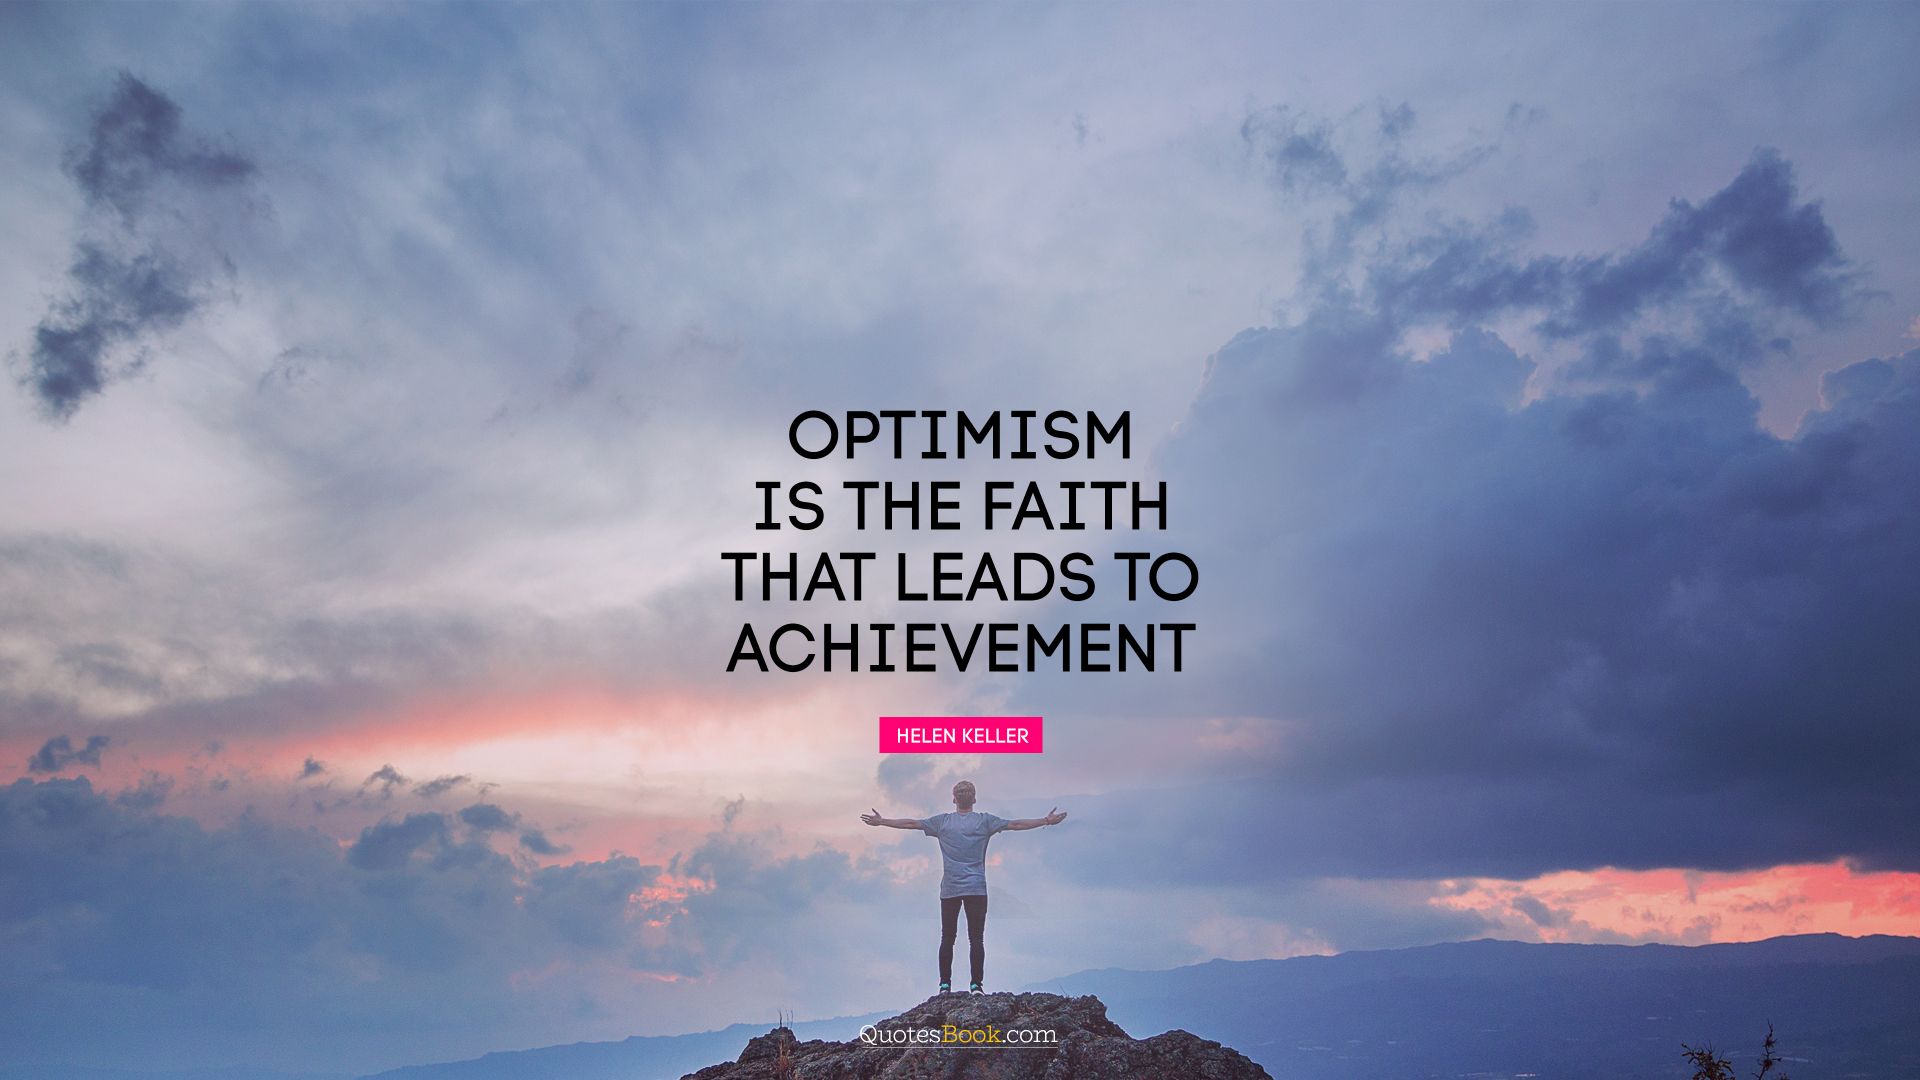 Optimism is the faith that leads to achievement. - Quote by Helen Keller